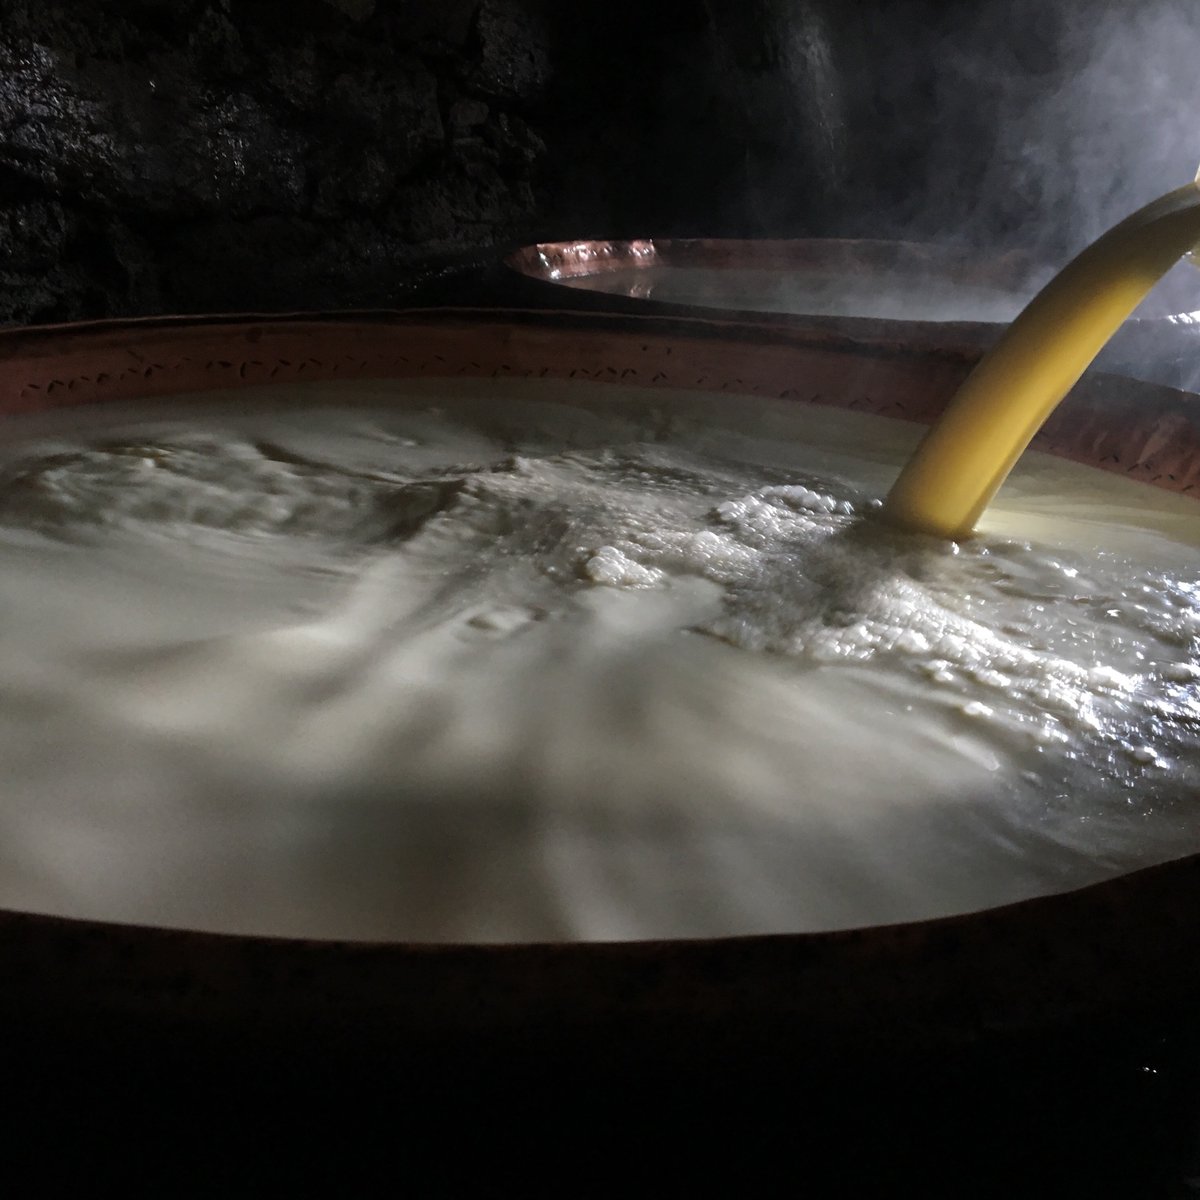 I'd like to share what I've learned while staying with my friend about the process of making butter. Immediately after milking the milk is poured into large hammered copper bowls that rest in a channel of flowing water which flows around them keeping them cool.